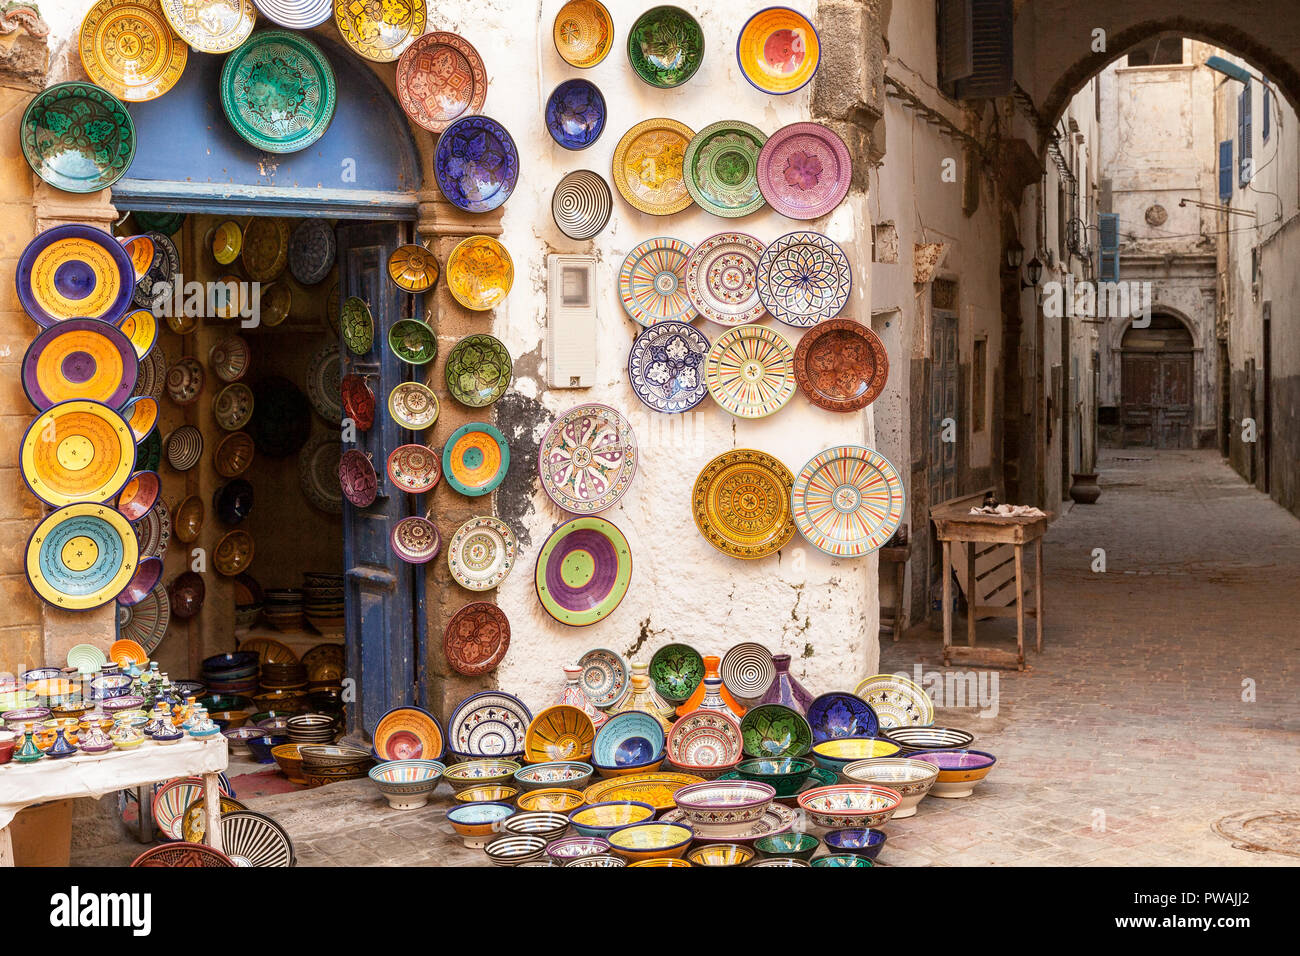 Morocco Essaouira colorful ceramics and pottery displayed for sale outside a store in a pedestrian shopping alley. Colorful and atmospheric. Stock Photo